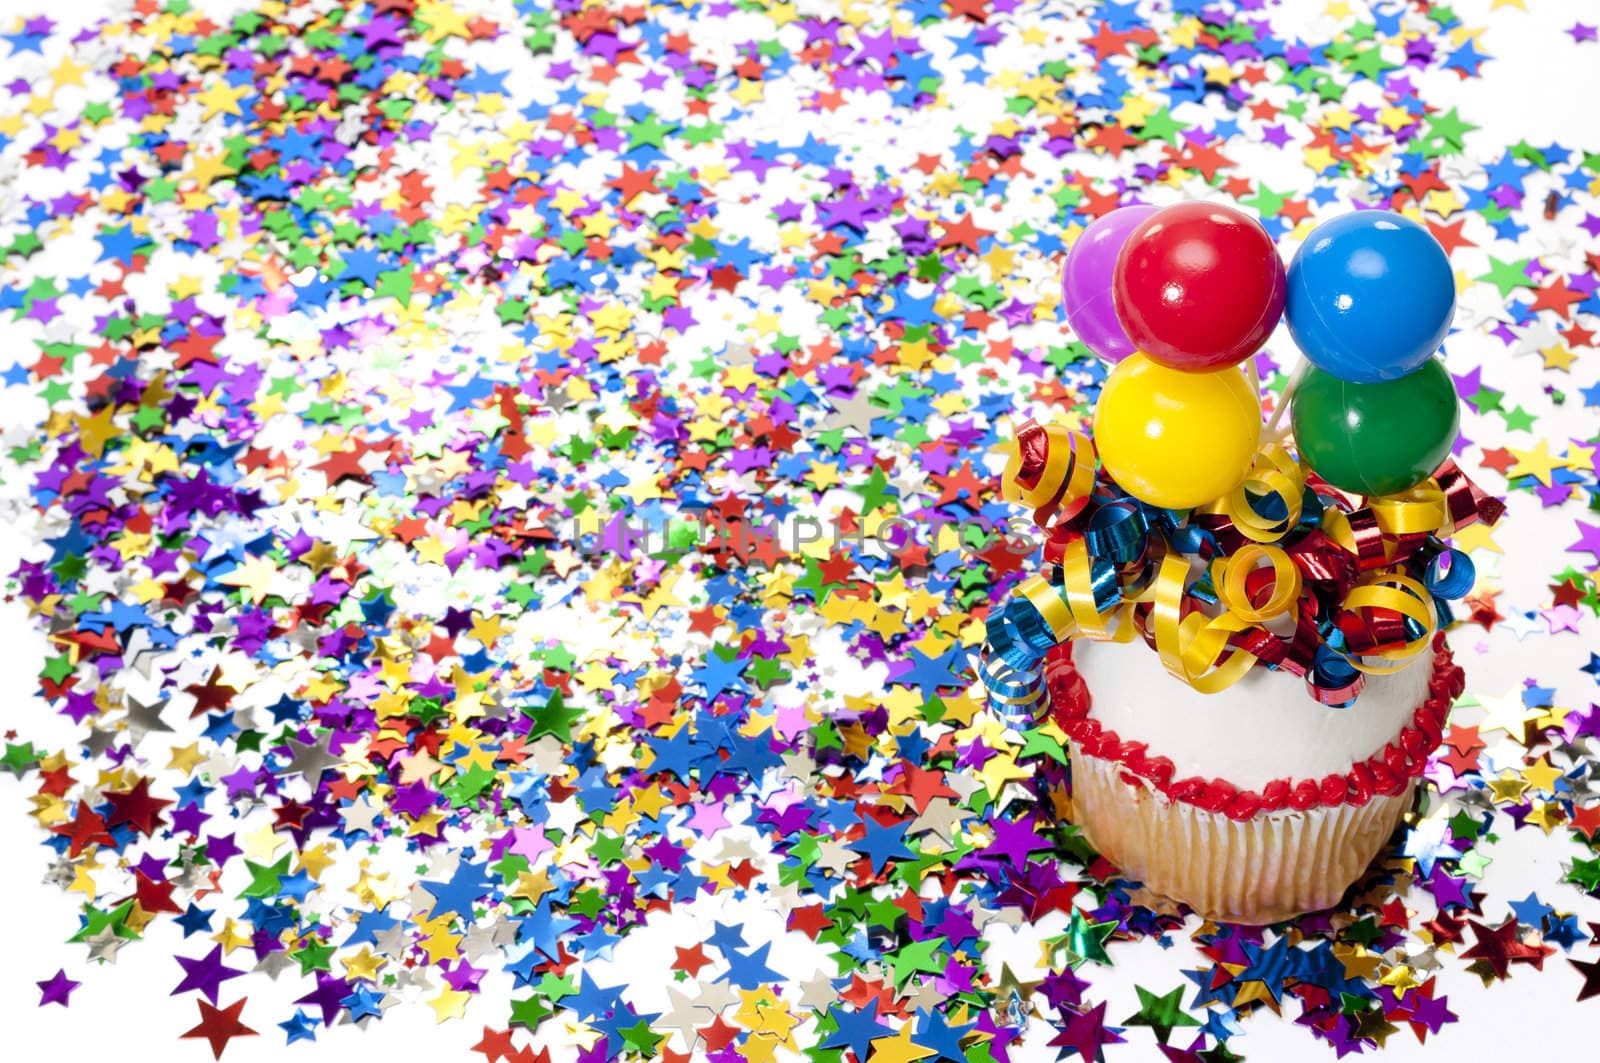 Decorated cupcake with balloons and ribbon with confetti at party.